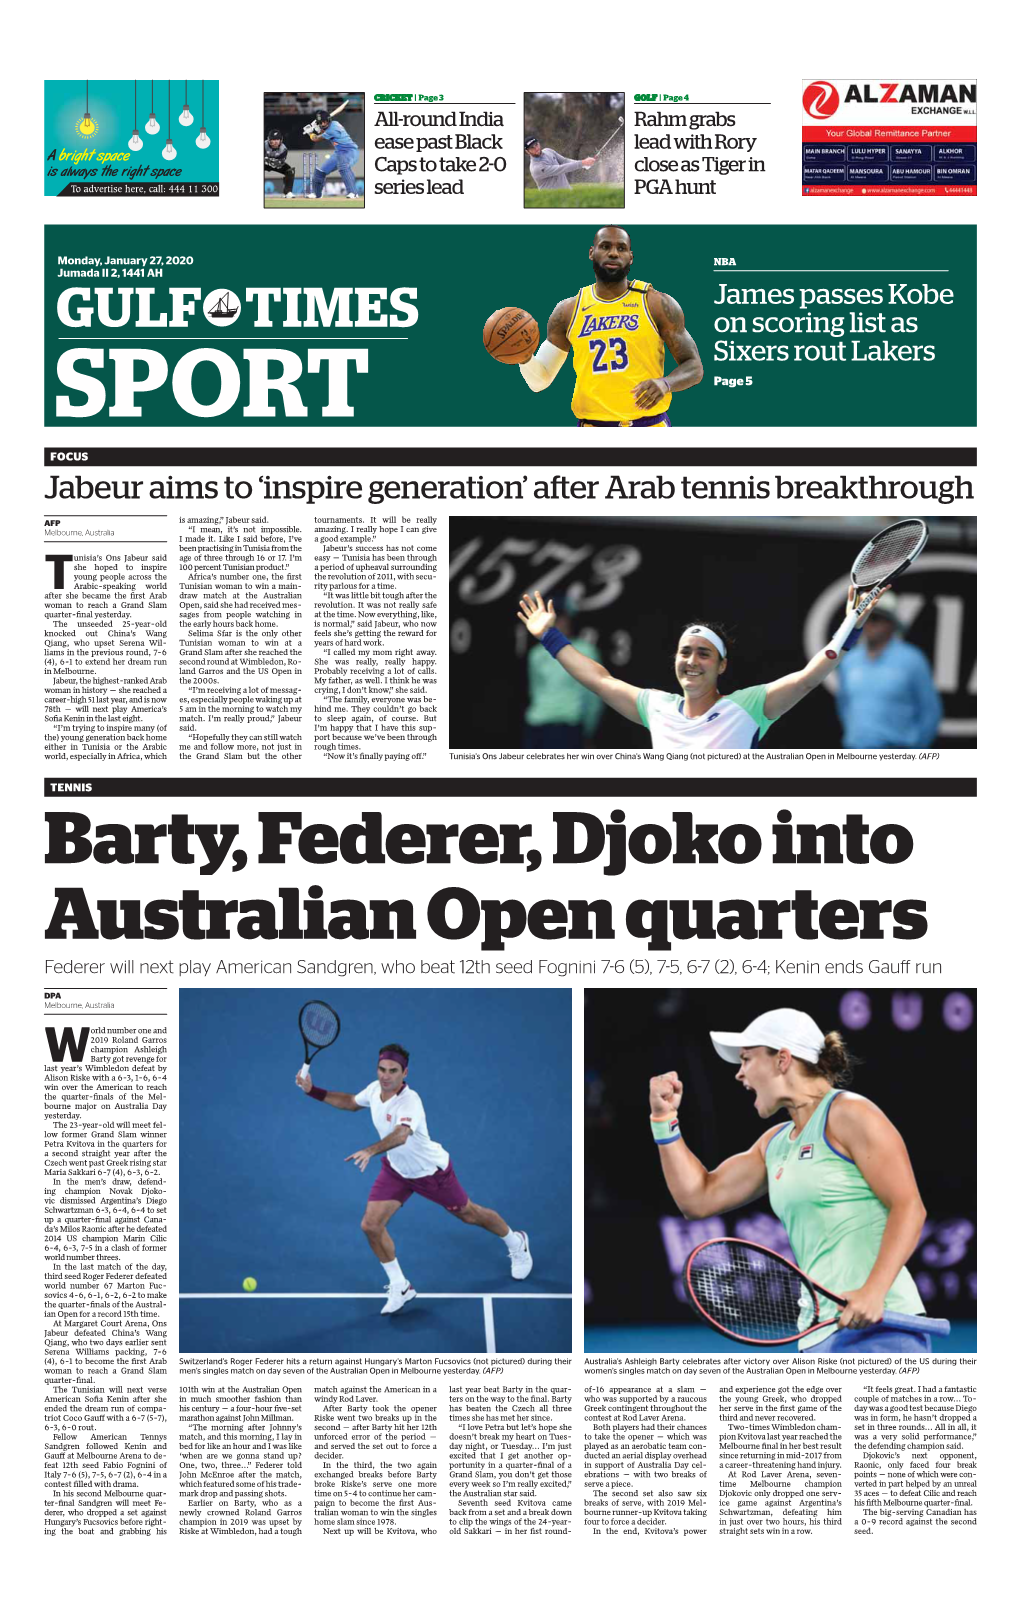 Australian “It Was Little Bit Tough After the Woman to Reach a Grand Slam Open, Said She Had Received Mes- Revolution